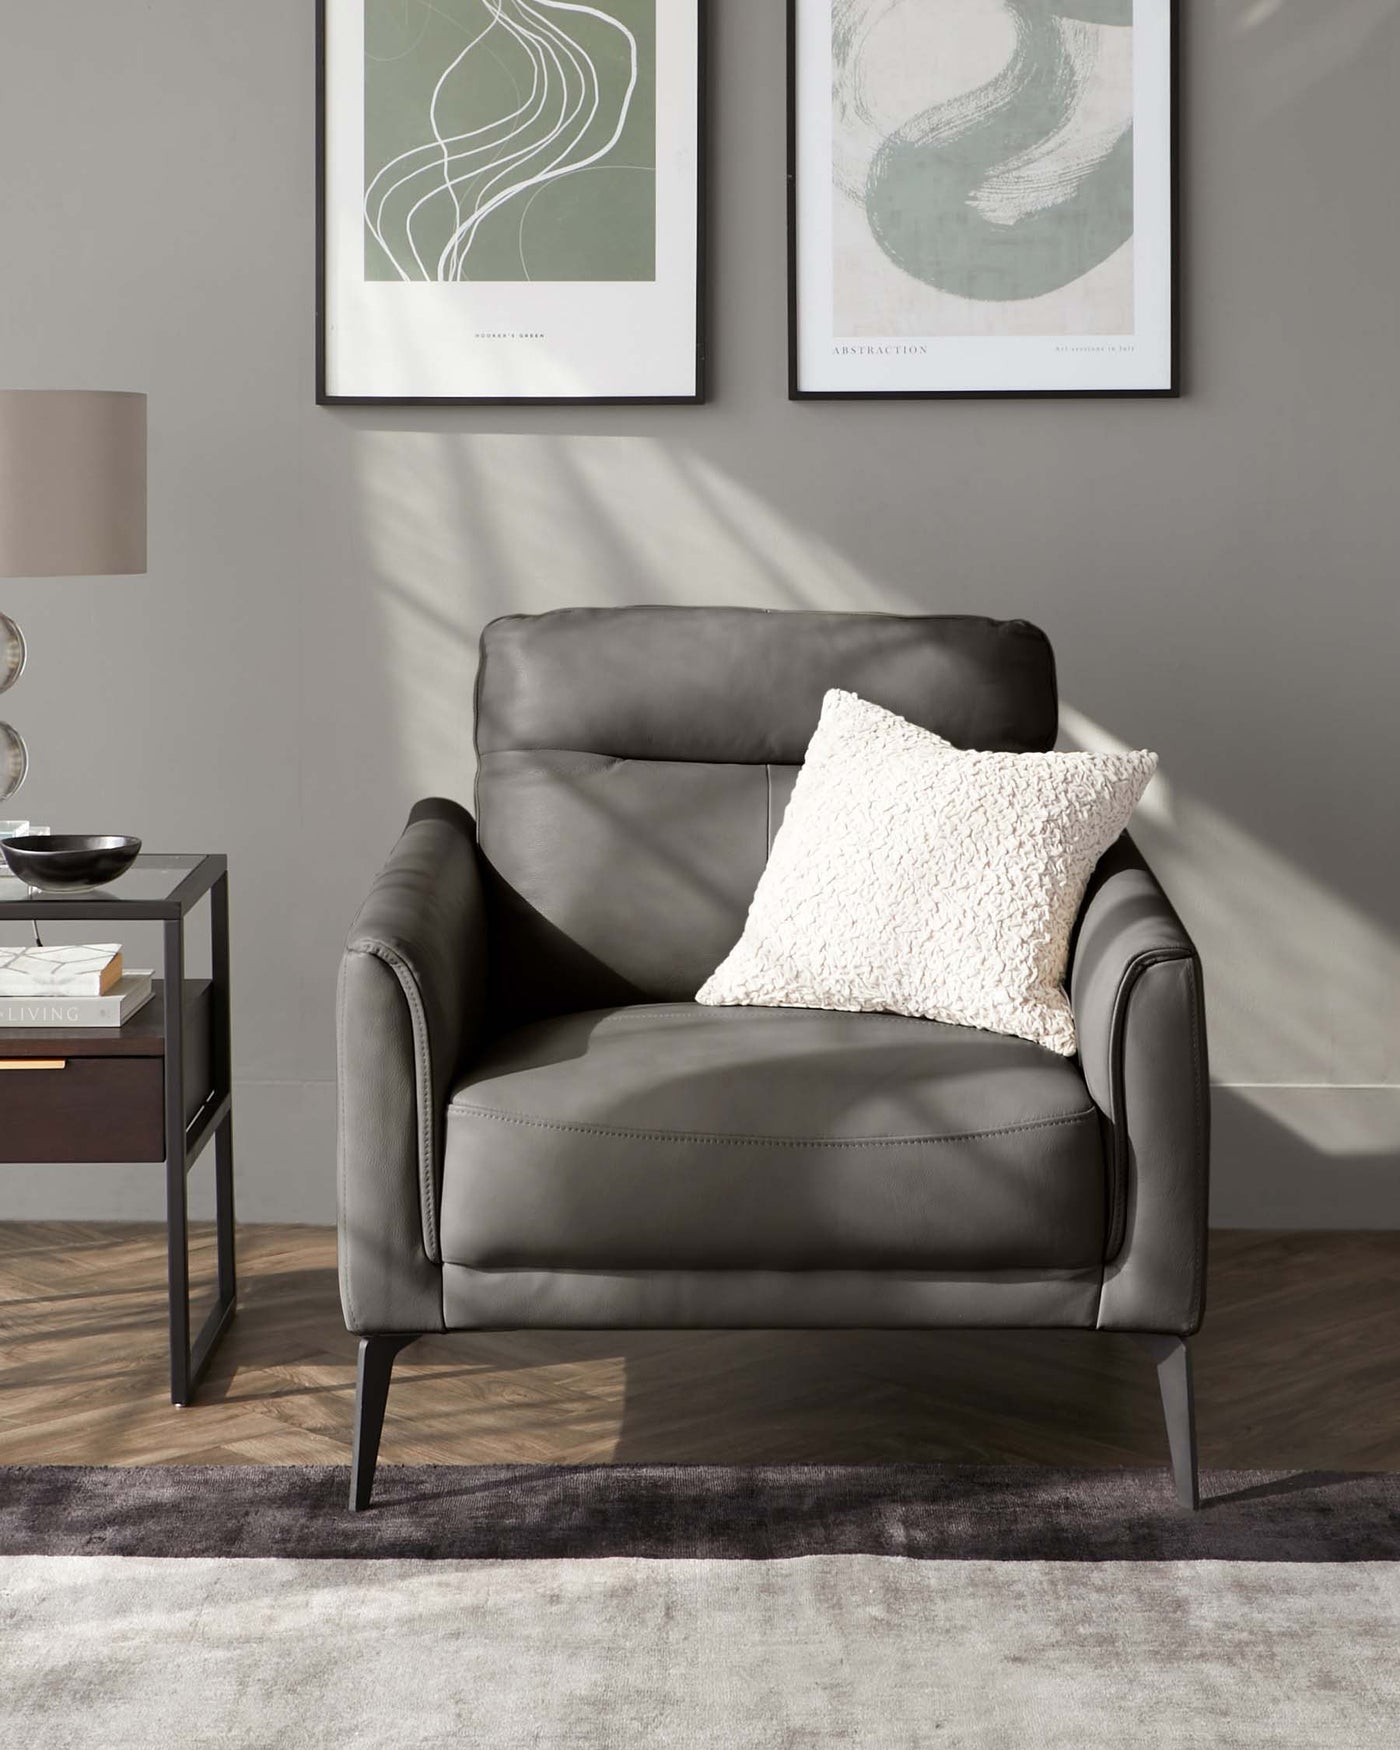 Modern charcoal leather armchair with clean lines and metal legs, complemented by a white textured throw pillow, set against a grey wall with framed abstract art and beside a minimalist black end table with decorative items. There's a grey floor lamp and a plush area rug completing the stylish scene.